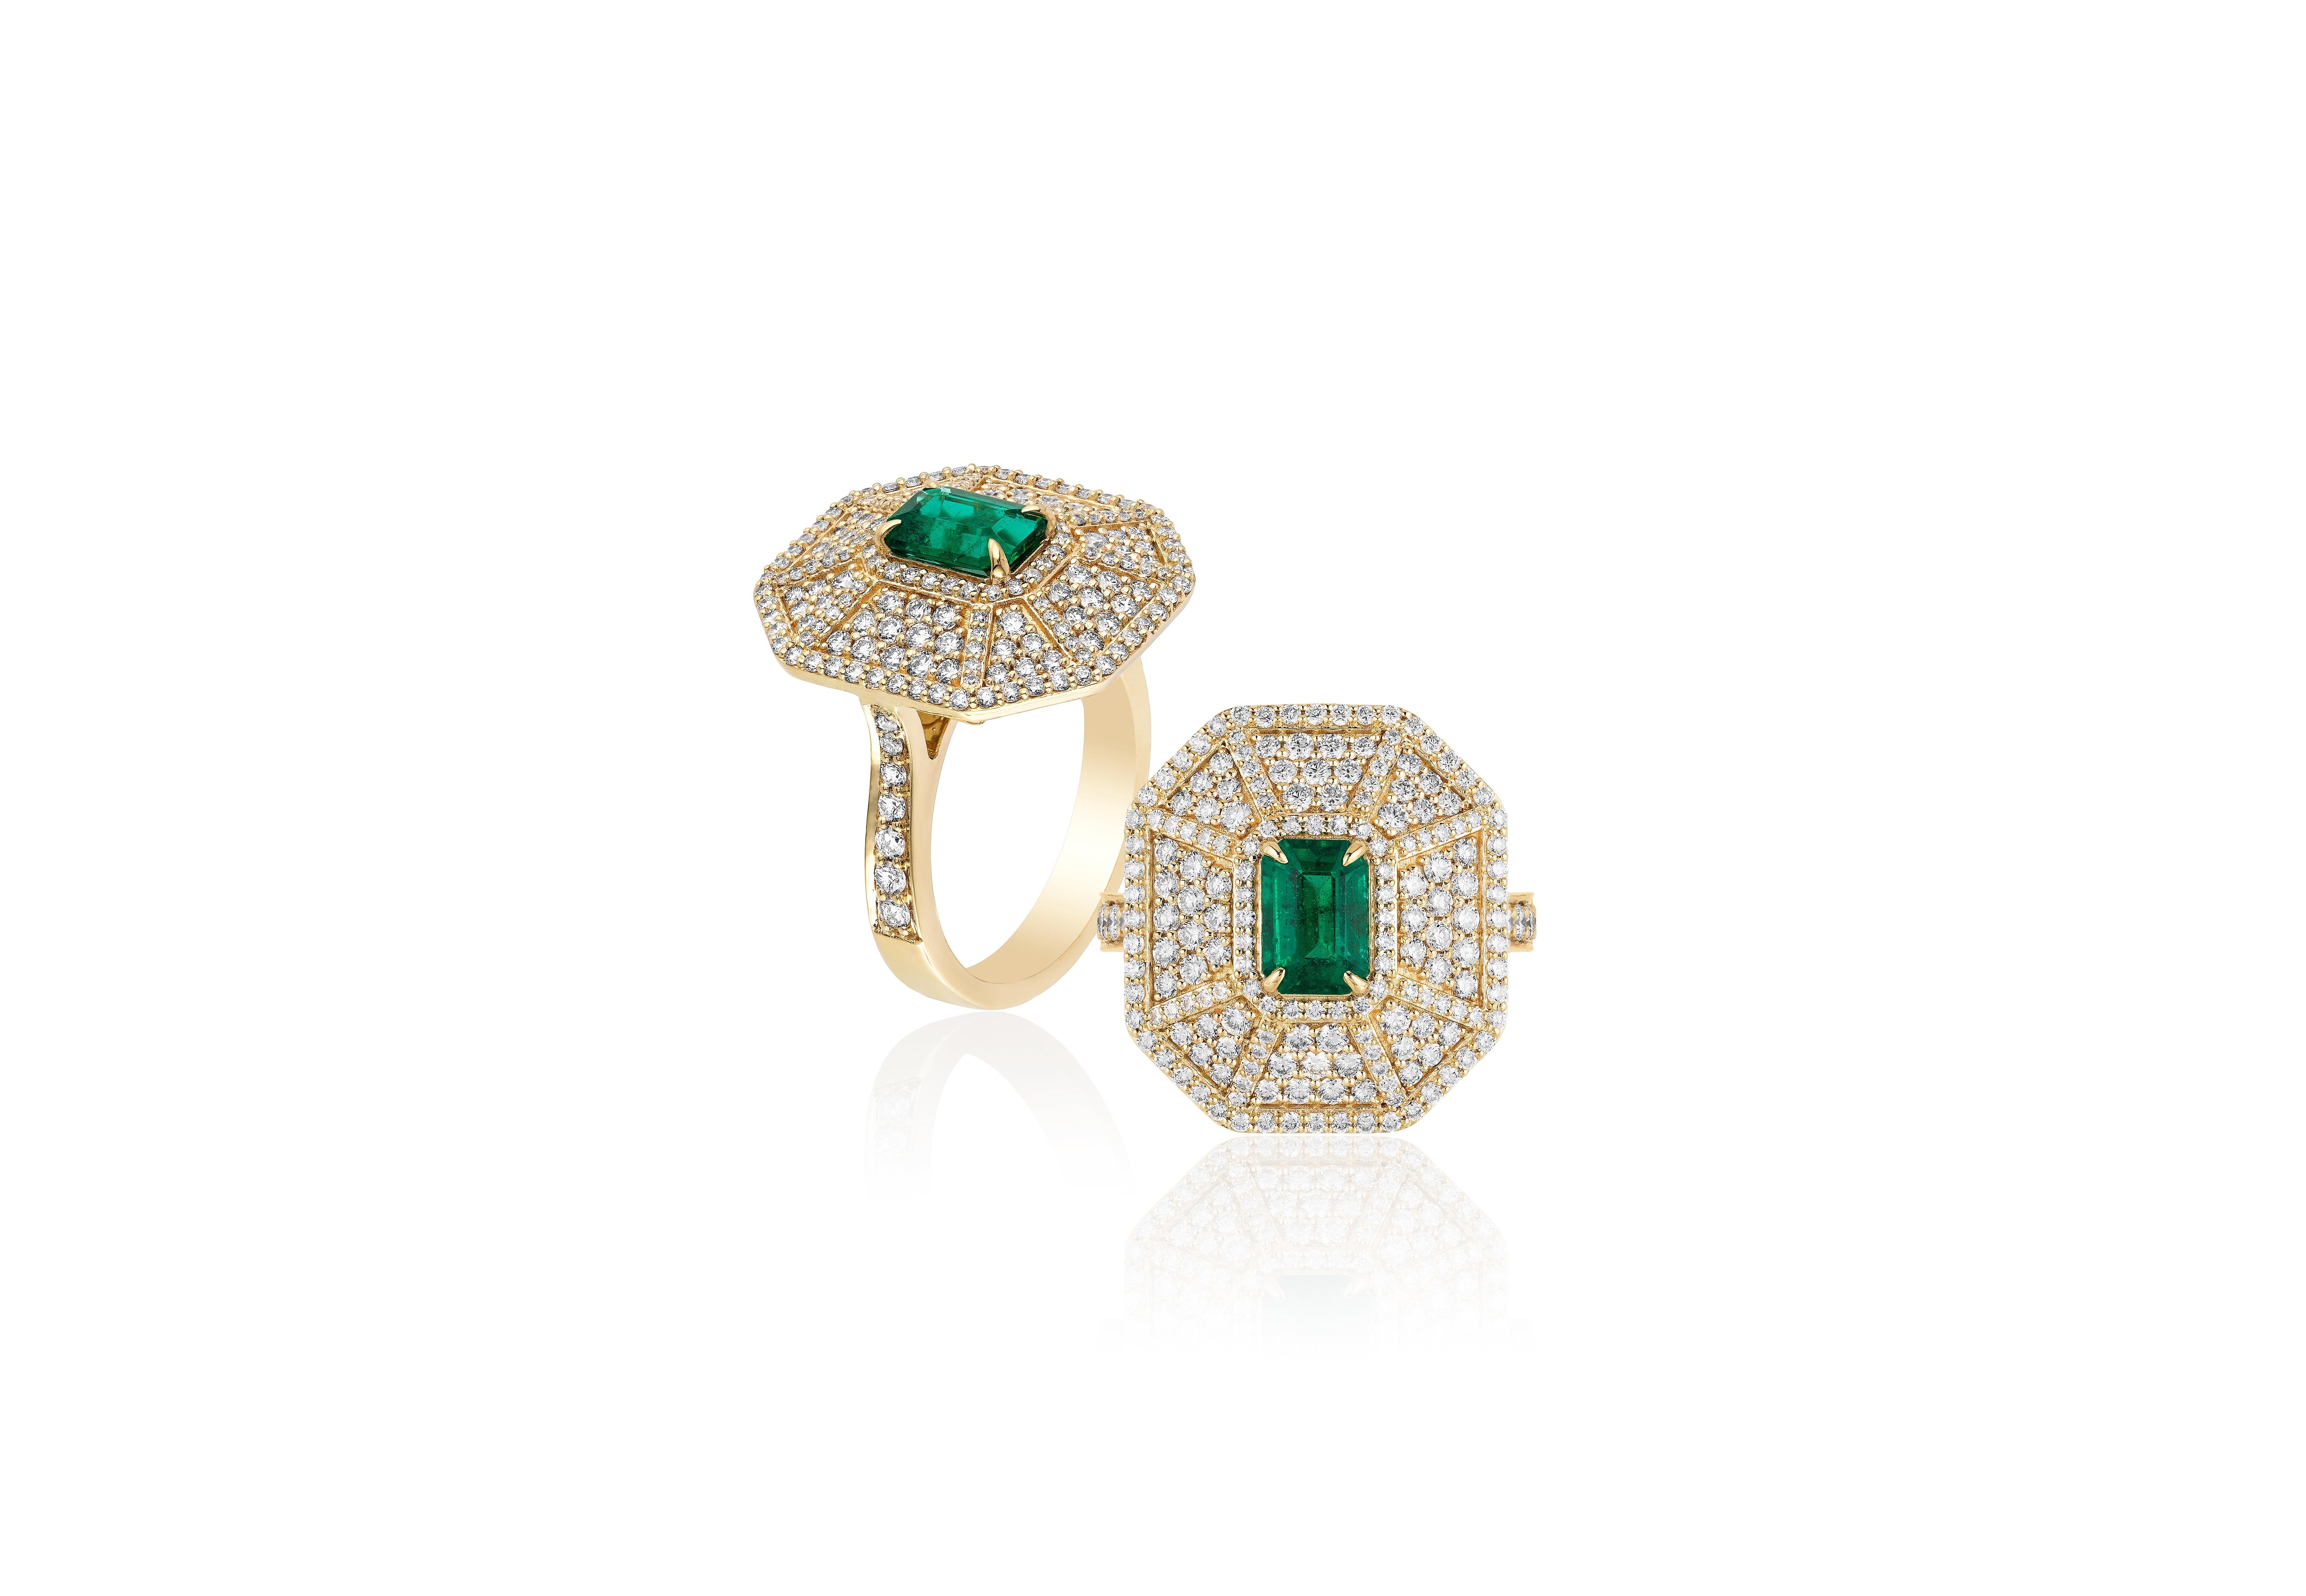 Hexagon Pave Emerald Ring with Diamonds in 18k Yellow Gold, from 'G-One' Collection

Stone Size: 7 x 5 mm  

Gemstone Weight: 0.95 Carats

Diamond: G-H / VS, Approx Wt: 1.35 Carats
